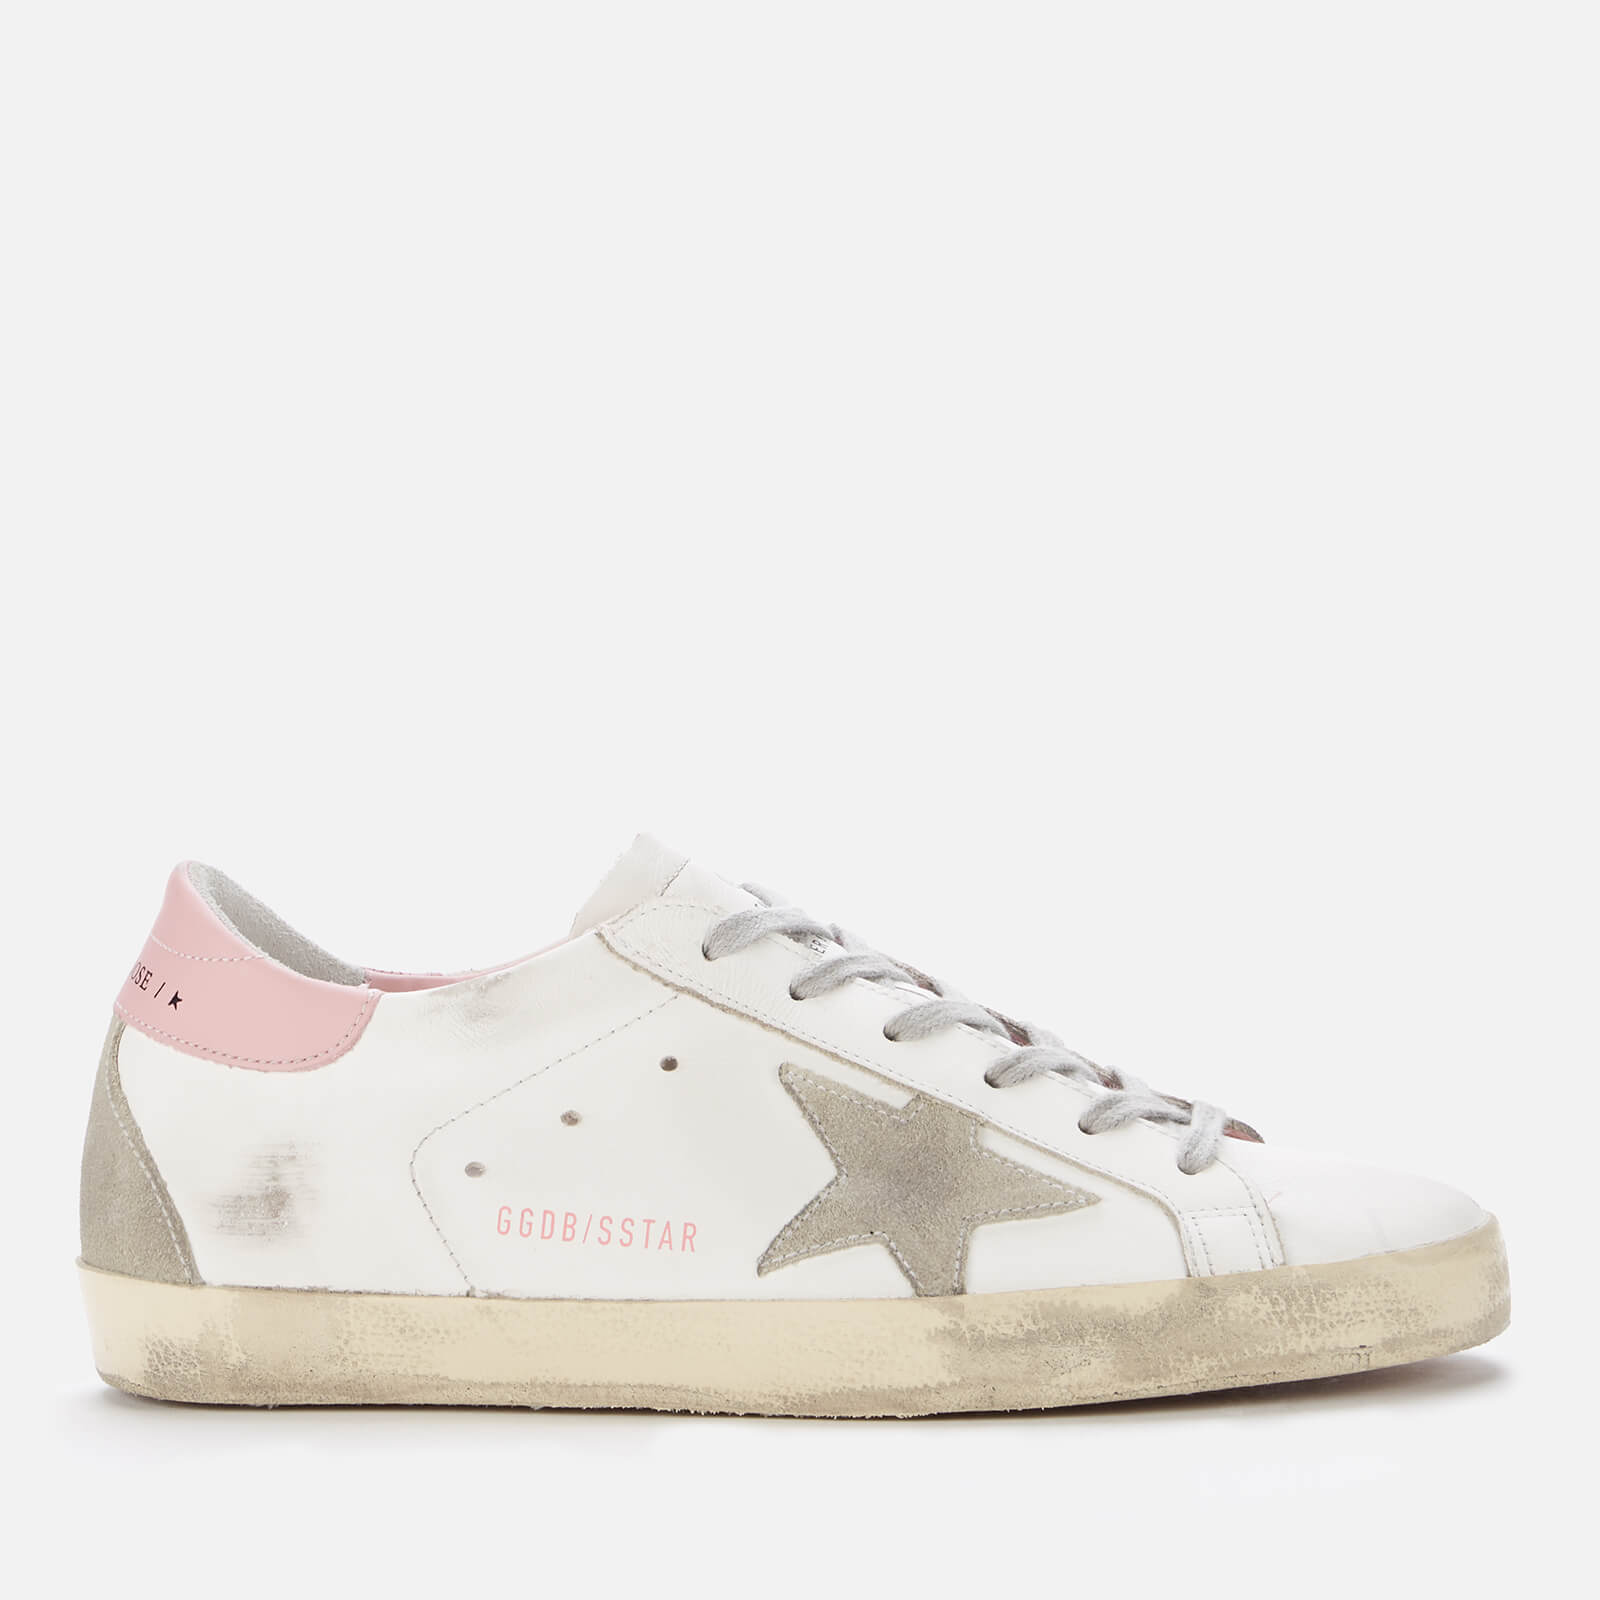 Golden Goose Deluxe Brand Women's Superstar Leather Trainers - White/Ice/Light Pink - UK 3